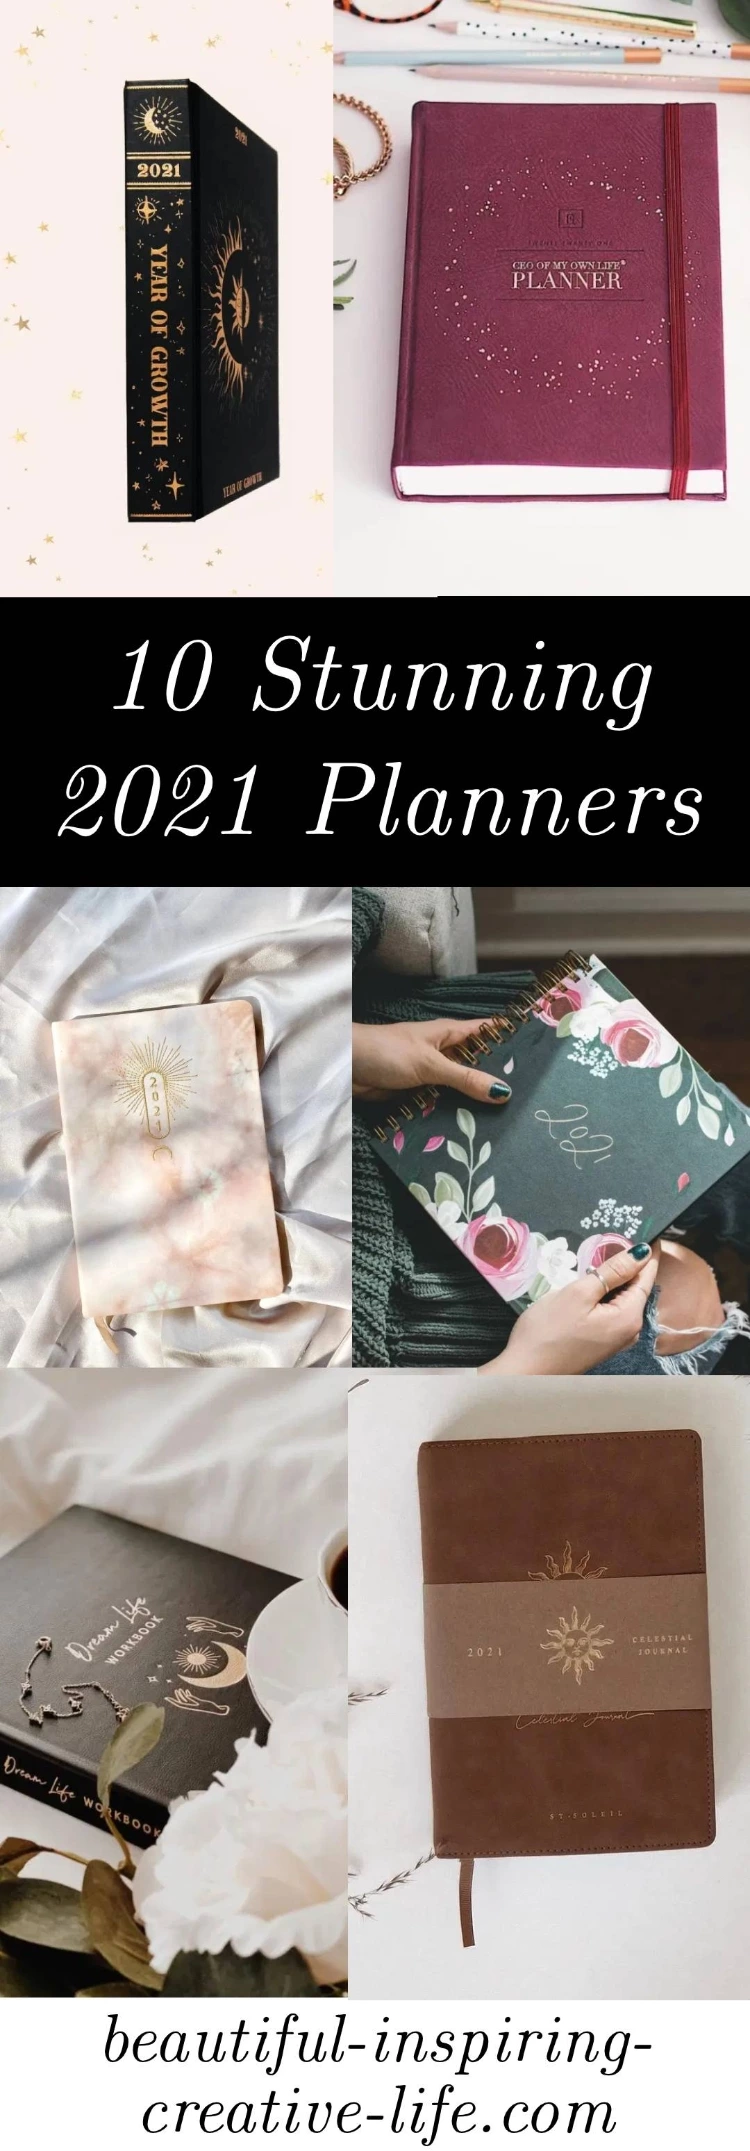 10 Stunning 2021 Planners To Get Your Sh*t Together! (From Small Businesses)